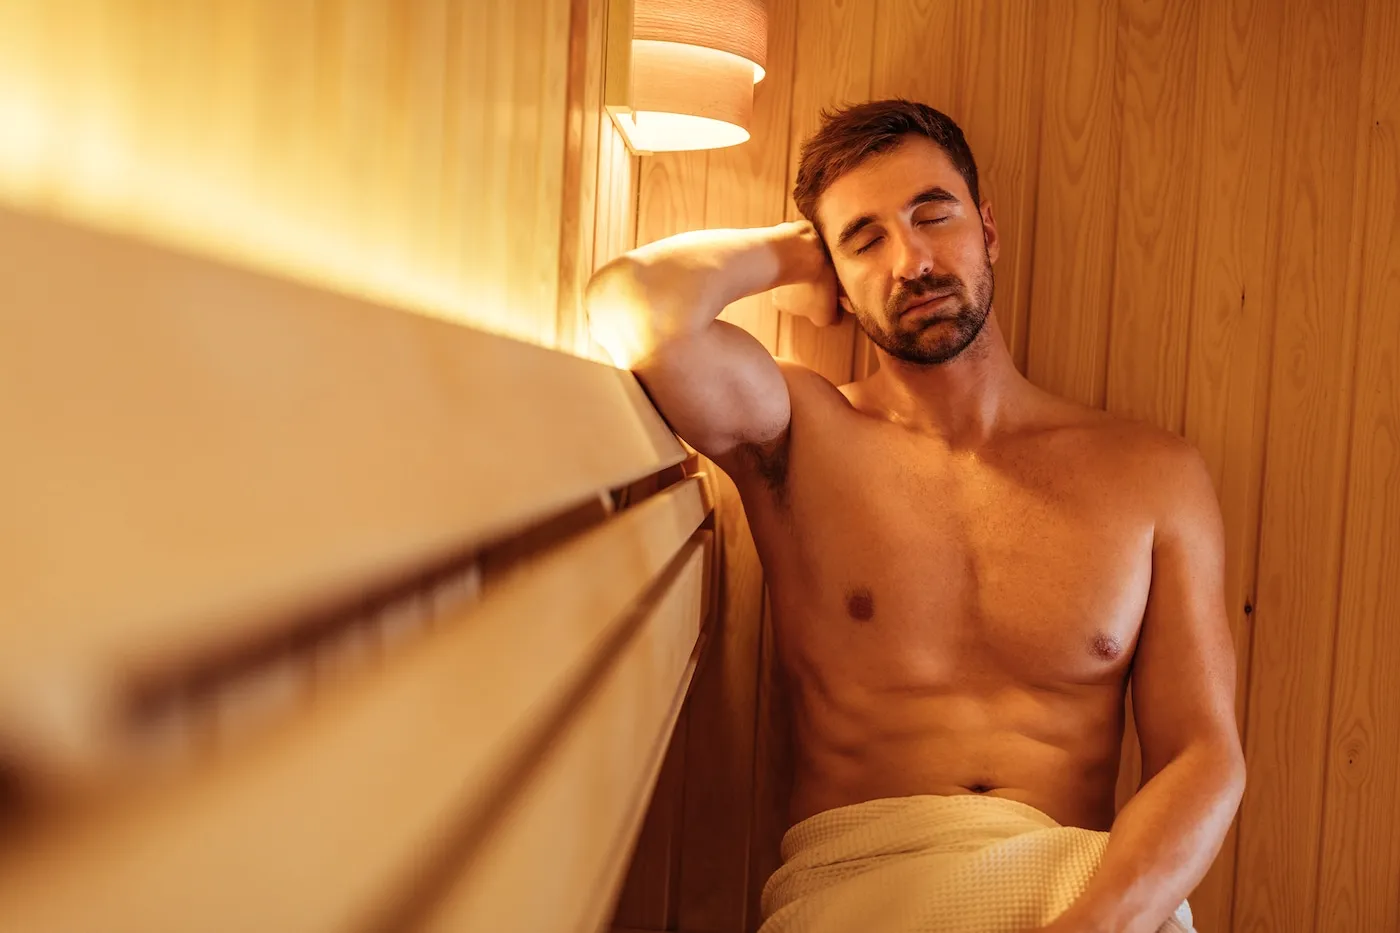 LGBT History Month: Gay saunas and bathhouses go back to the 1400s